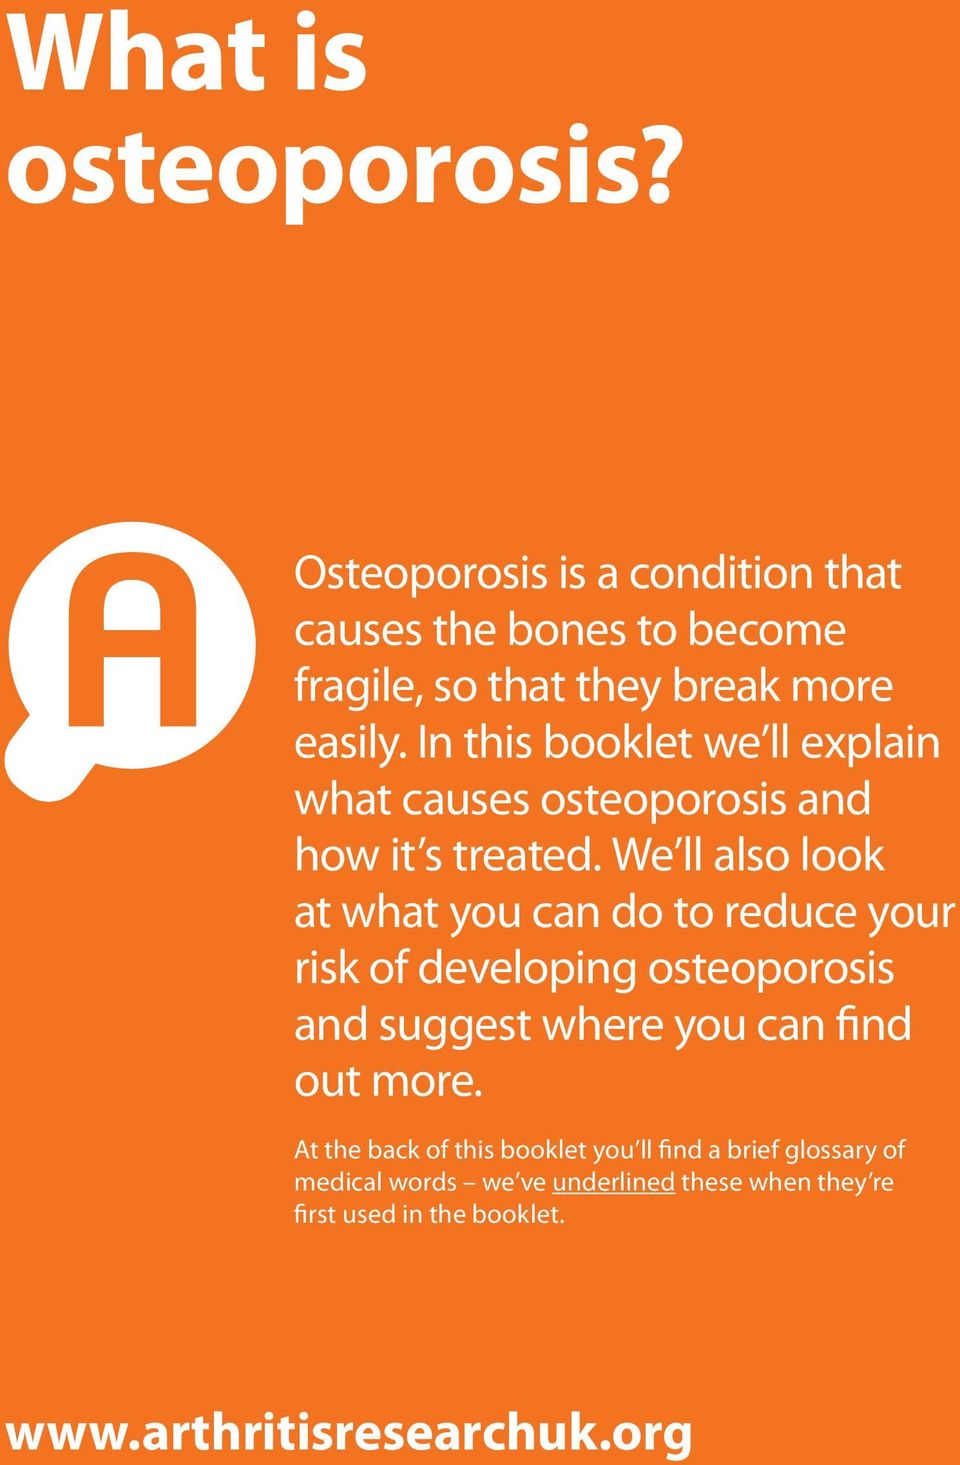 We ll also look at what you can do to reduce your risk of developing osteoporosis and suggest where you can find out more.